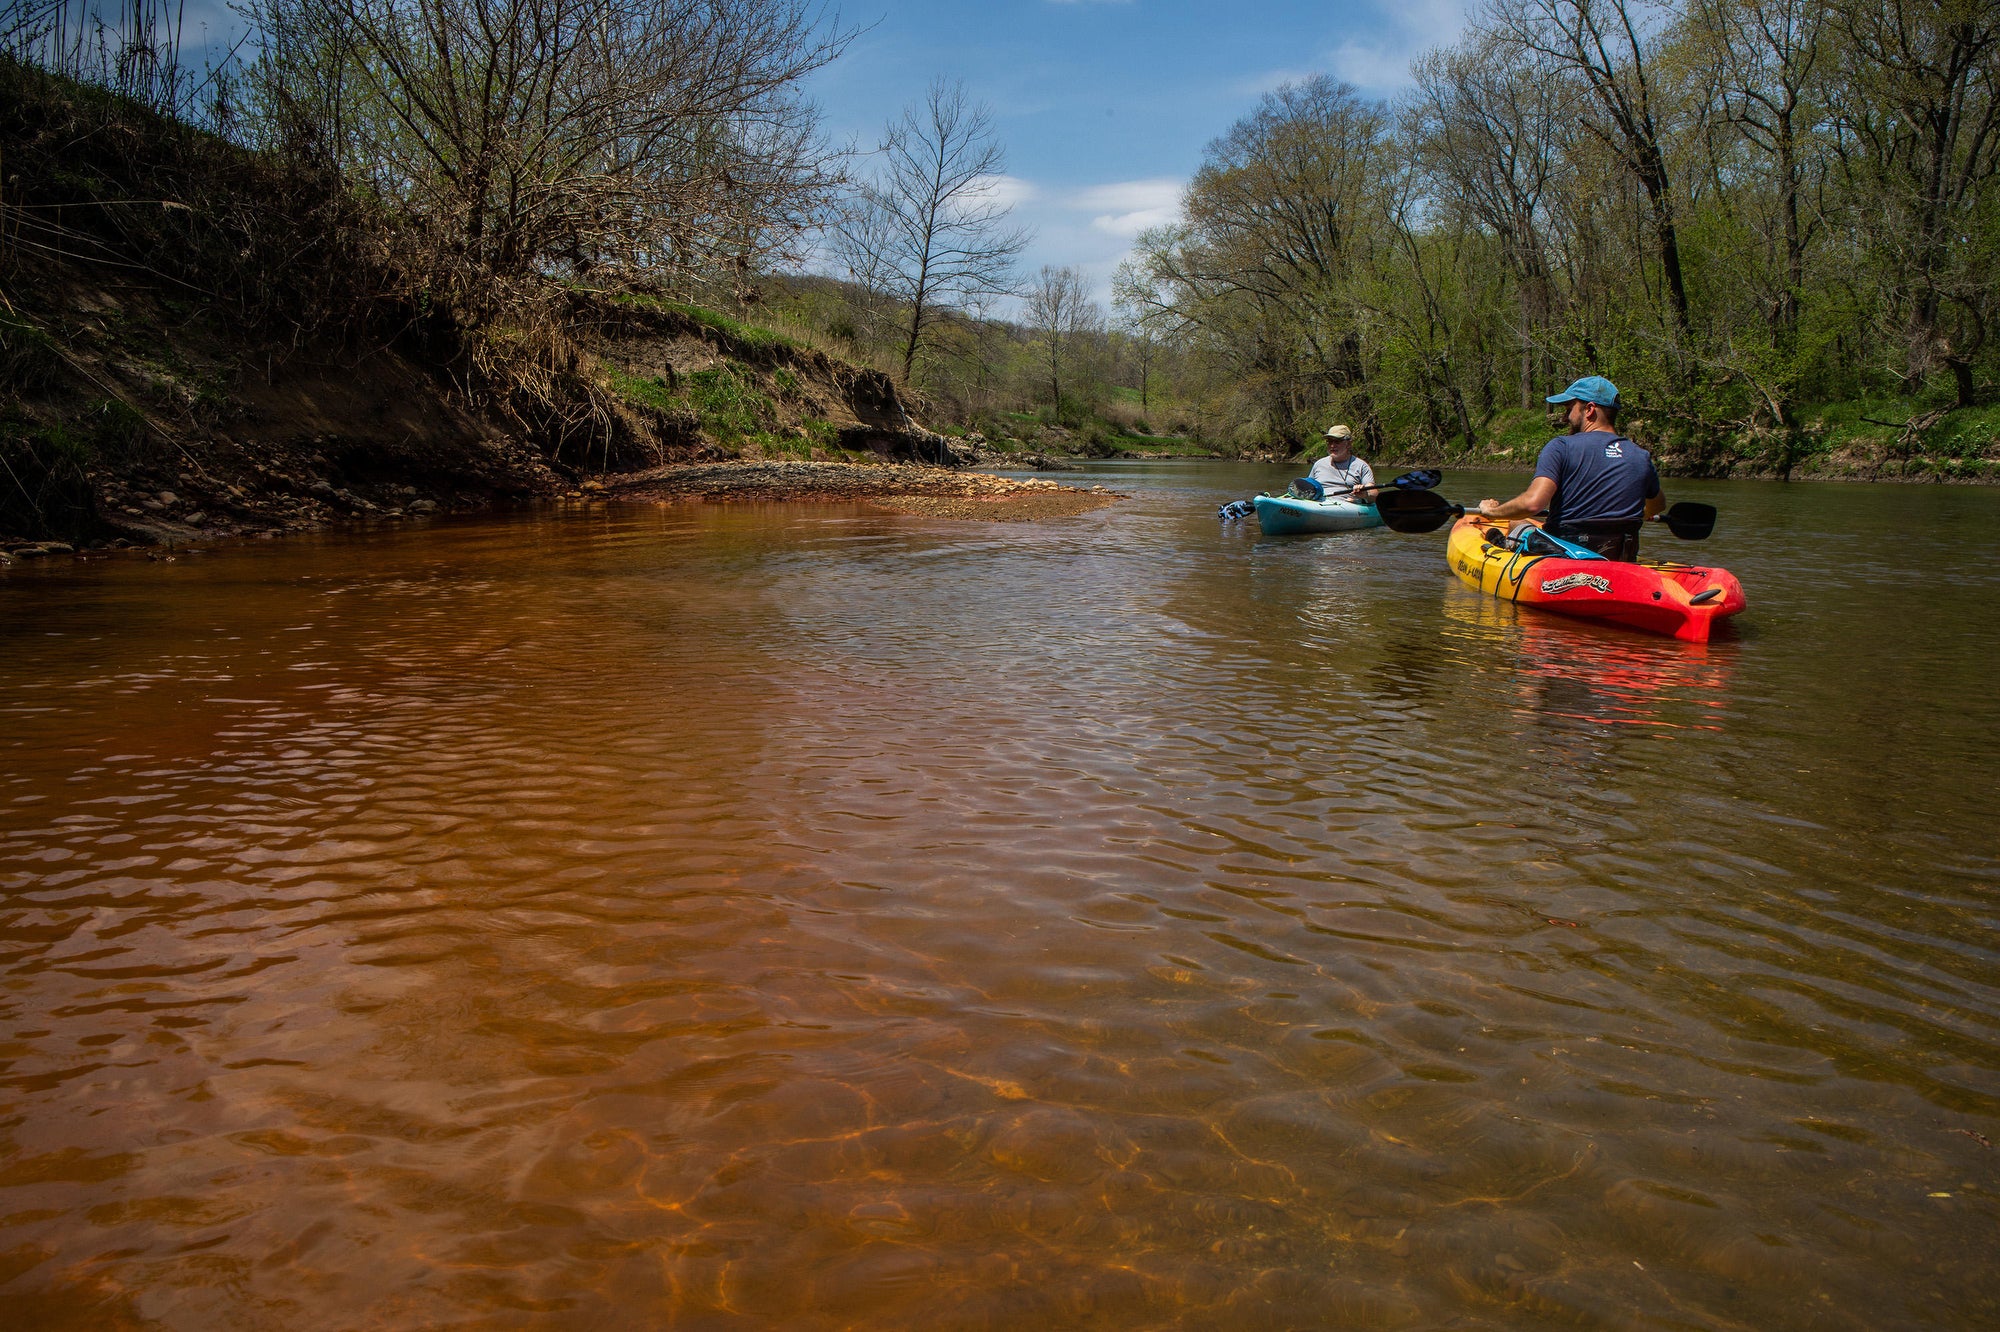 Andrew Rehn, right, of the Prairie Rivers Network and Lan Richart of Eco-Justice Collaborative paddle past toxic coal ash waste seepage on the Vermilion River in Illinois.